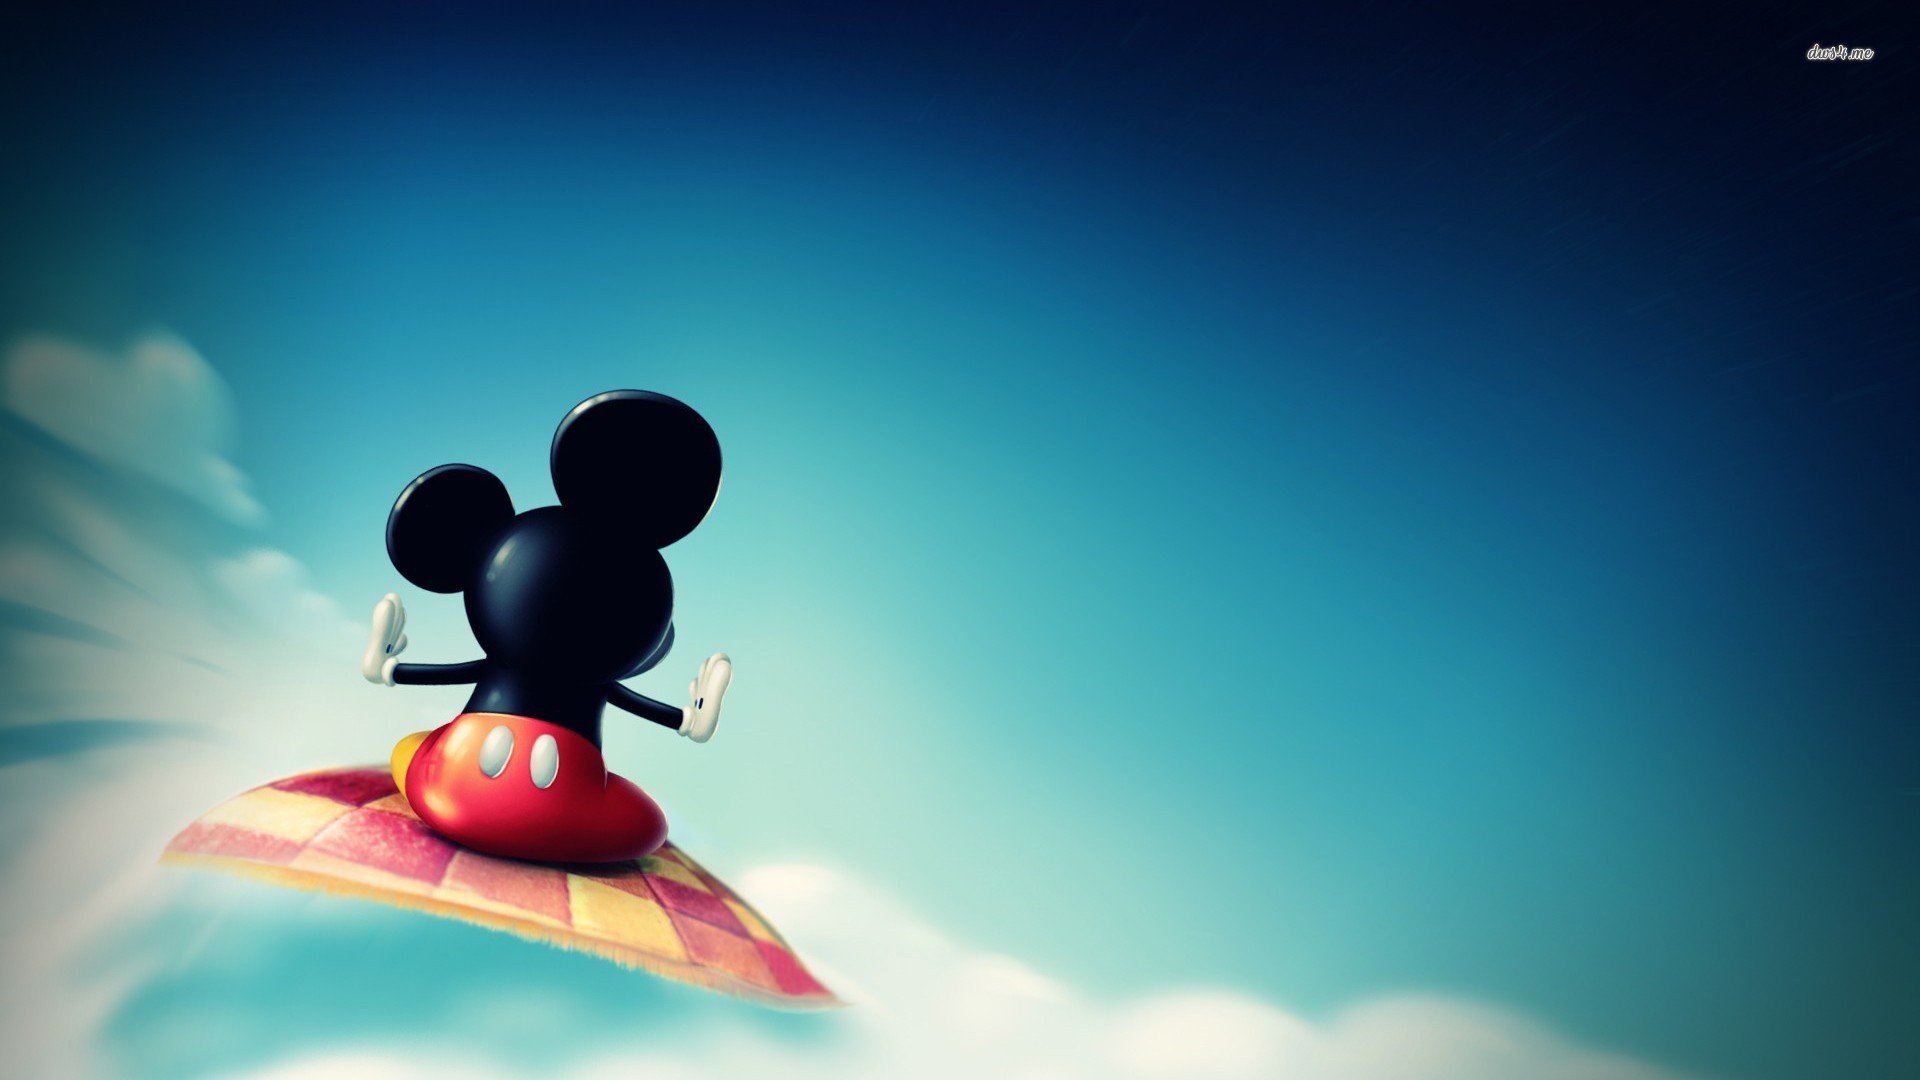 Images of World Of Illusion Starring Mickey Mouse And Donald Duck | 1920x1080